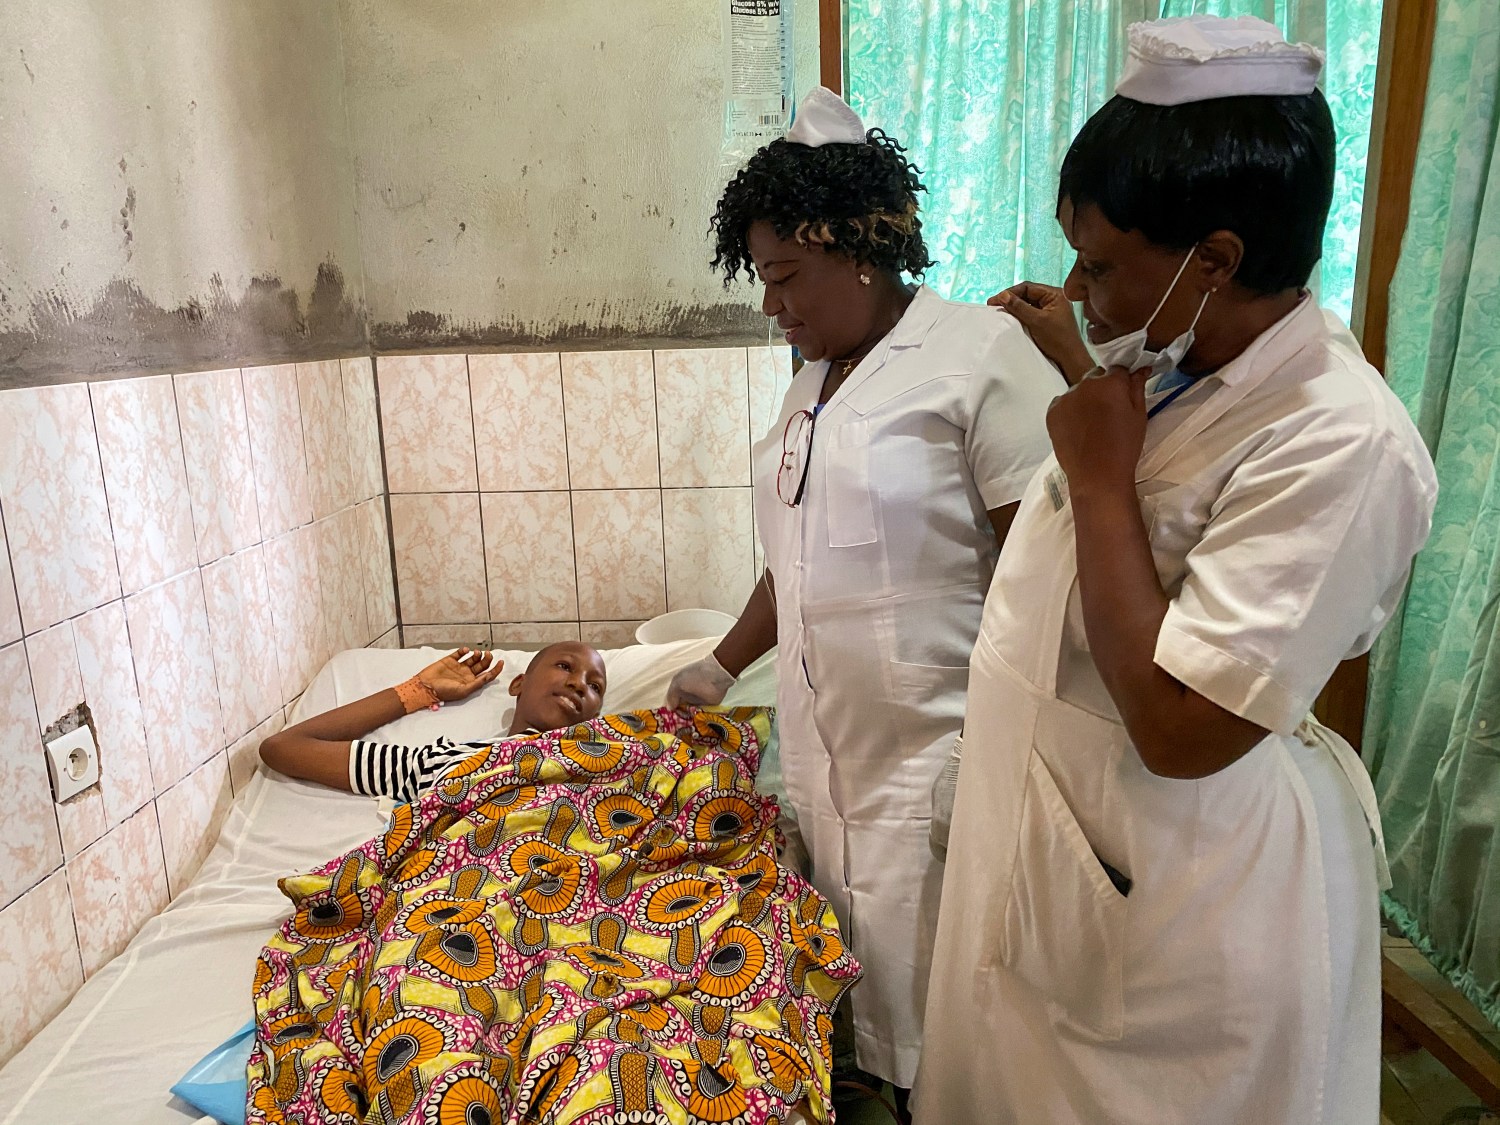 Nurses talk with Blessing Mbeng, 13, who was shot by gunmen after they stormed his school, as he lies in a hospital bed in Kumba, Cameroon October 25, 2020. REUTERS/Josiane Kouagheu